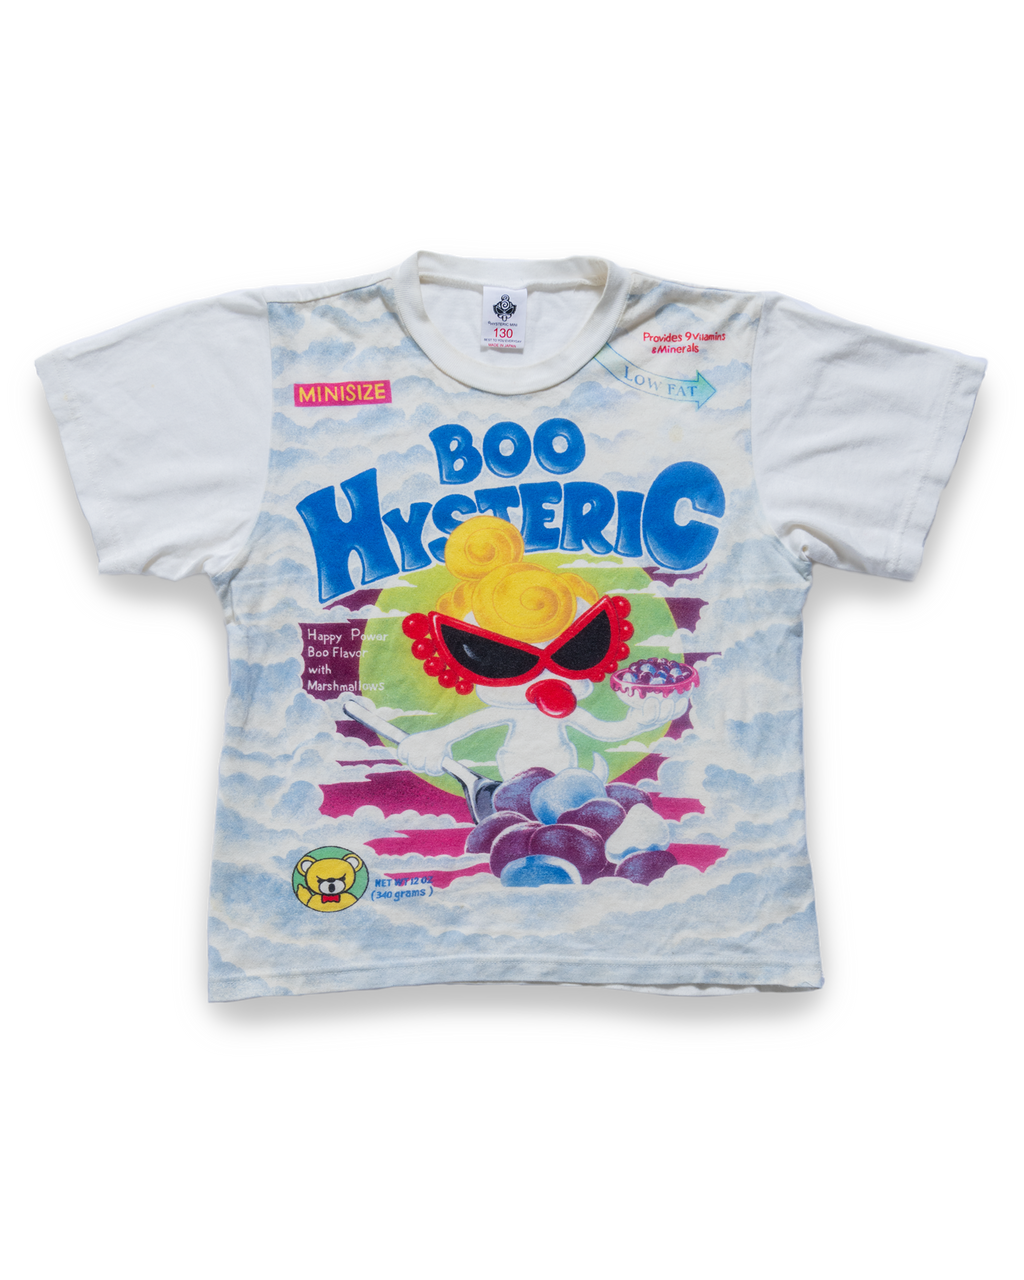 Hysteric Mini Boo Cereal Shirt